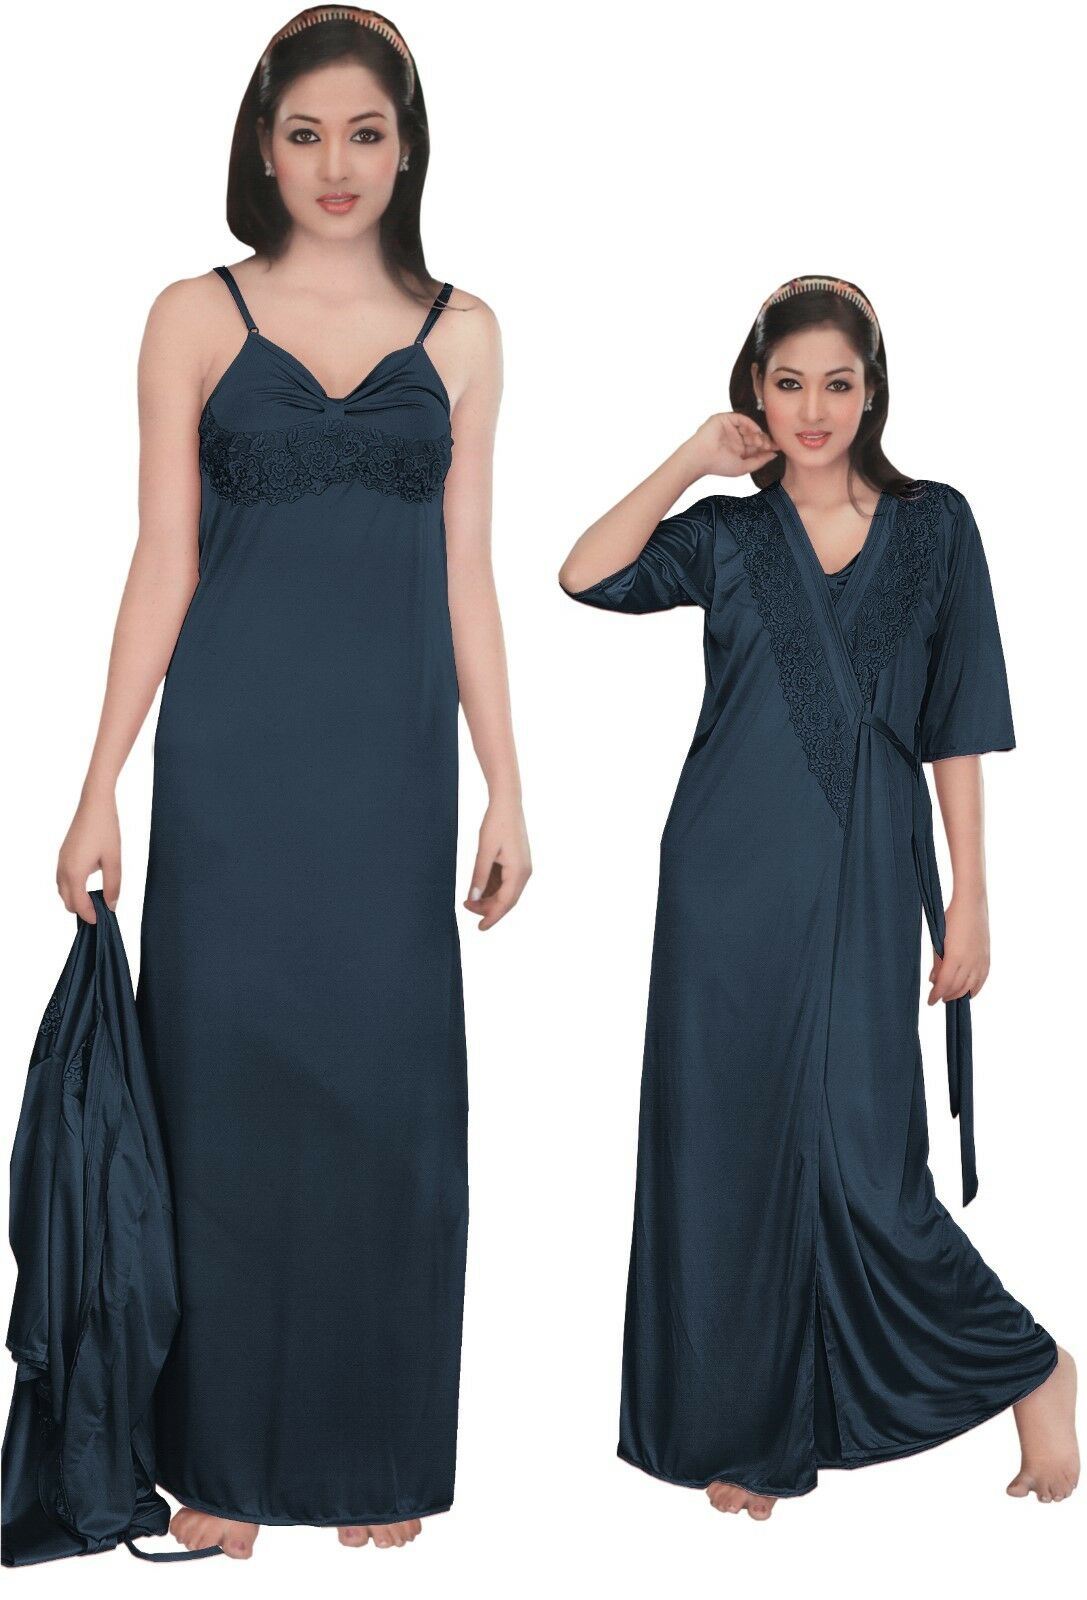 Midnight Blue / One Size: Regular Women Strappy 2 Pcs Satin Long Nighty and Robe The Orange Tags